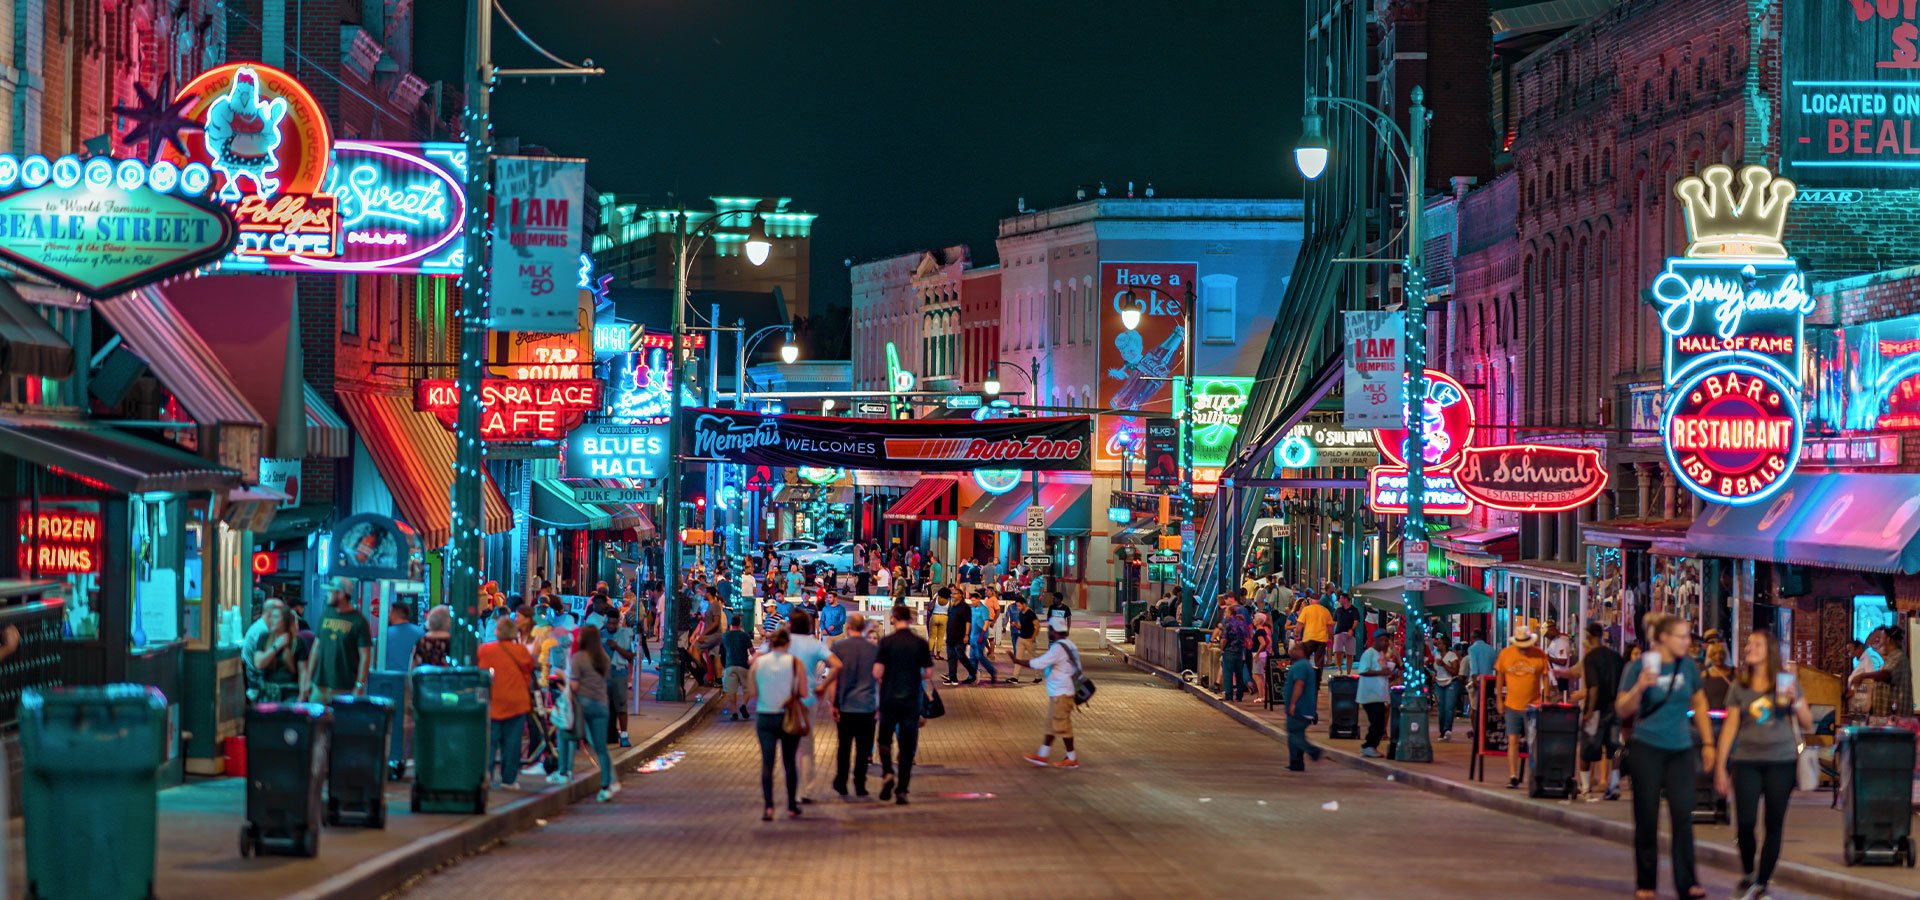 Beale Street is a must see on your Memphis vacation